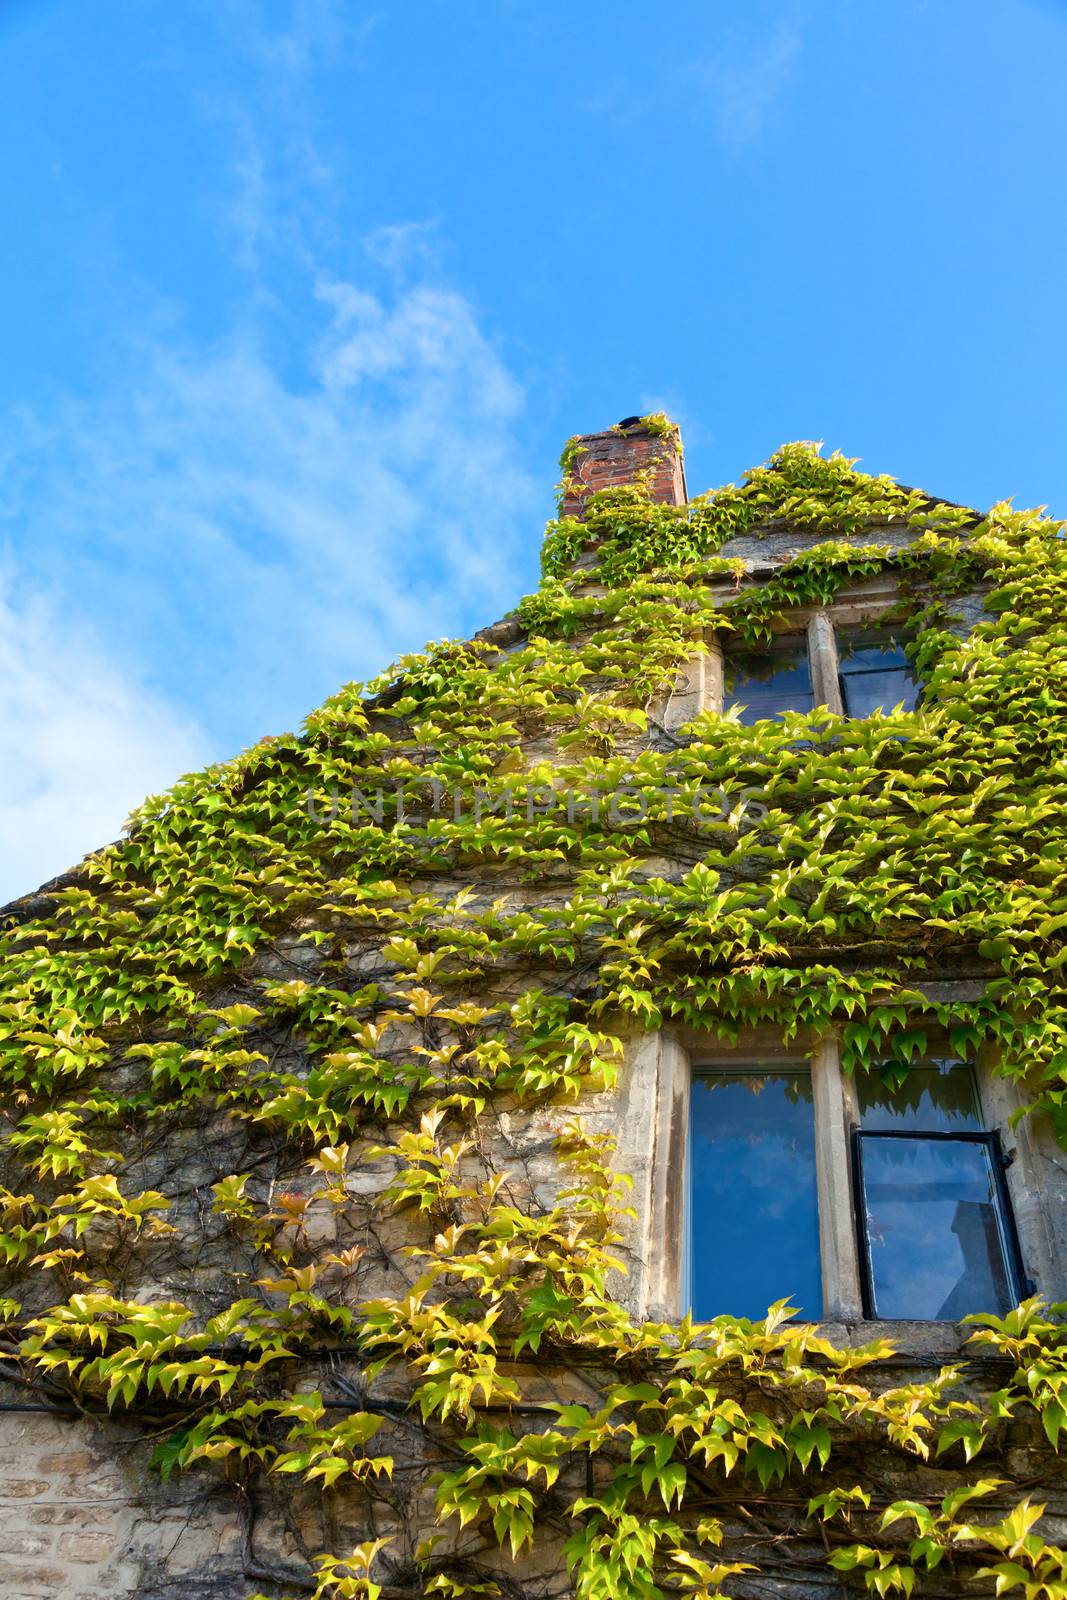 House covered by climbing English ivy by naumoid